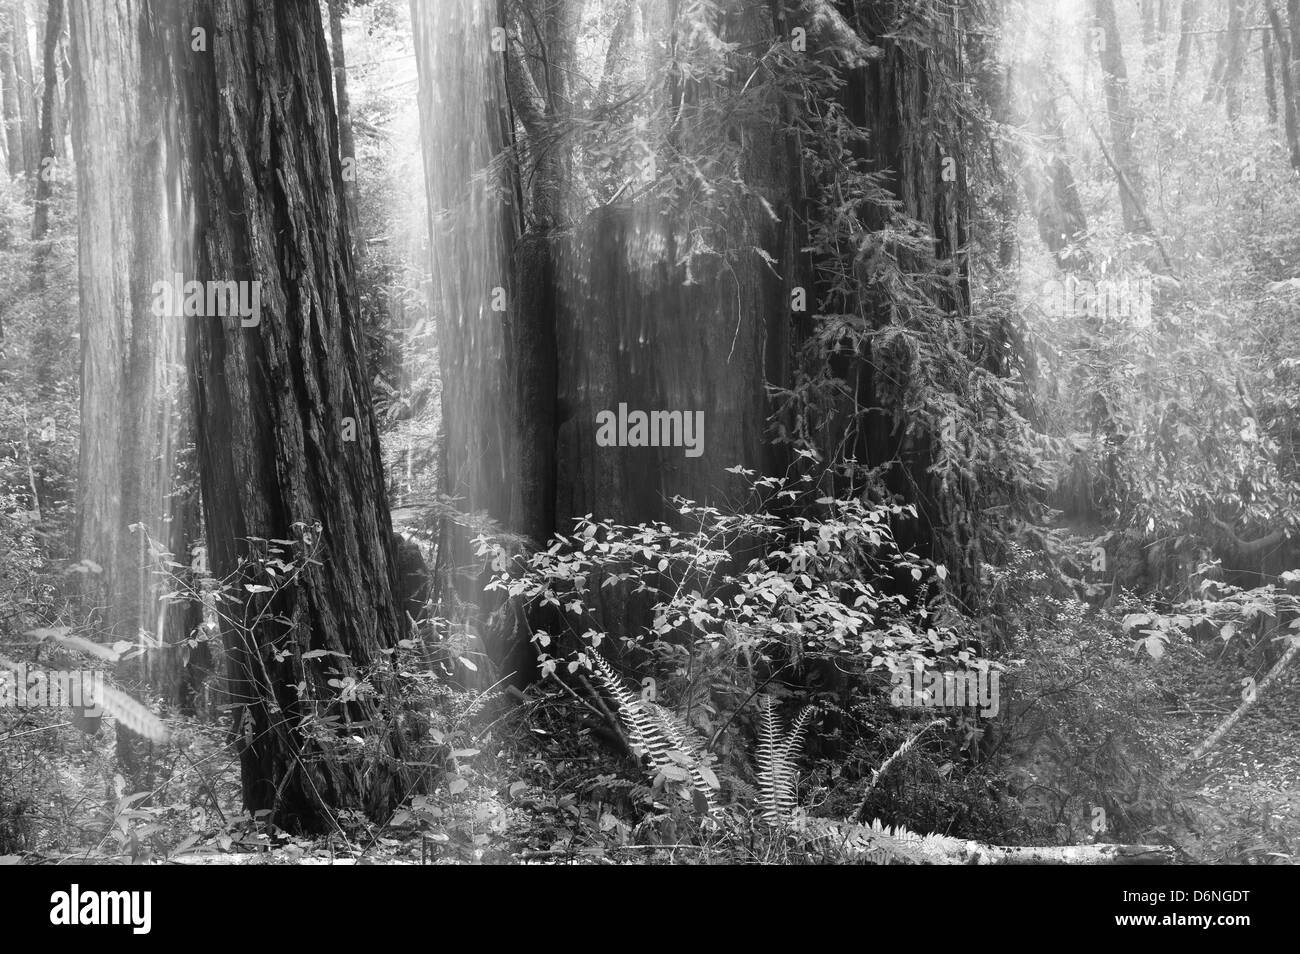 Abstract Redwood forest at Fall Creek, California, USA. Stock Photo